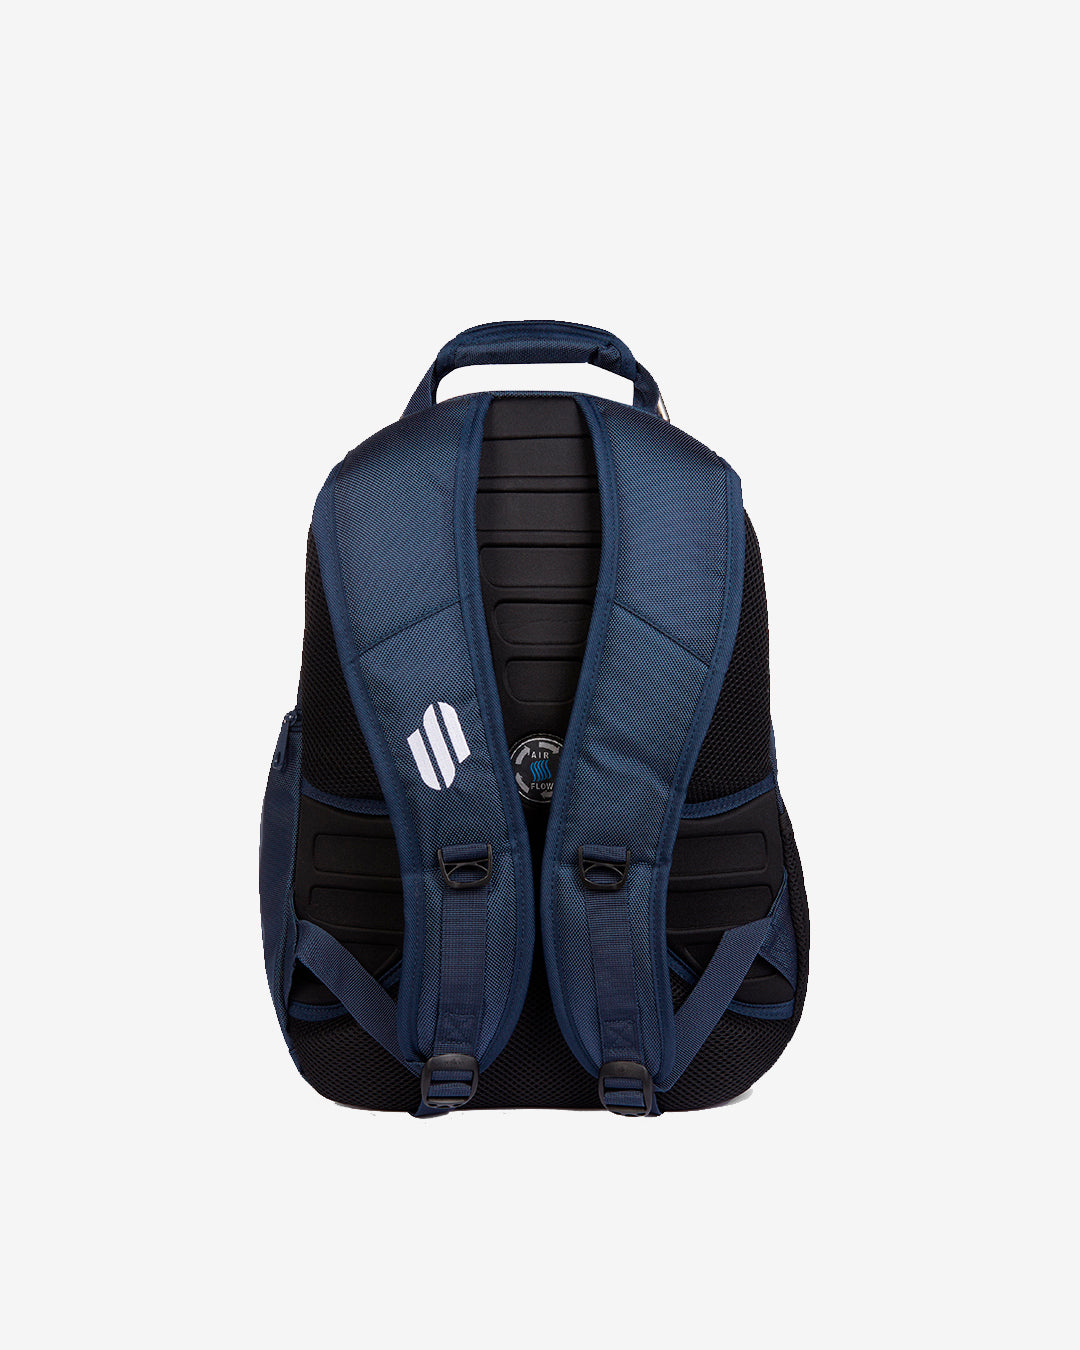 CF:008 - Clapham Falcons Backpack - Navy